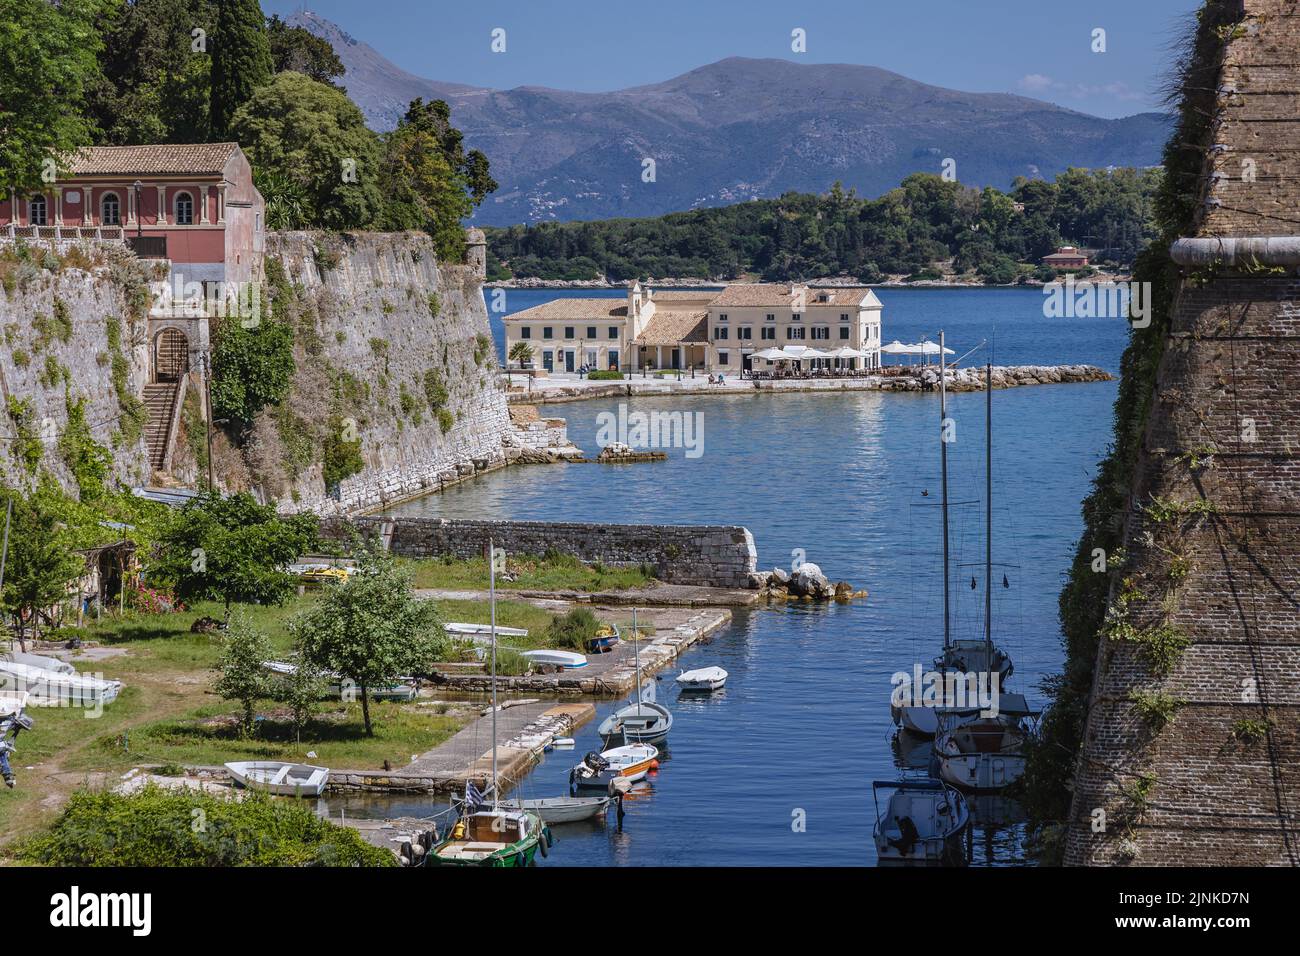 Moat called Contrafossa in Old Venetian Fortress in Corfu town on a Greek island of Corfu Stock Photo